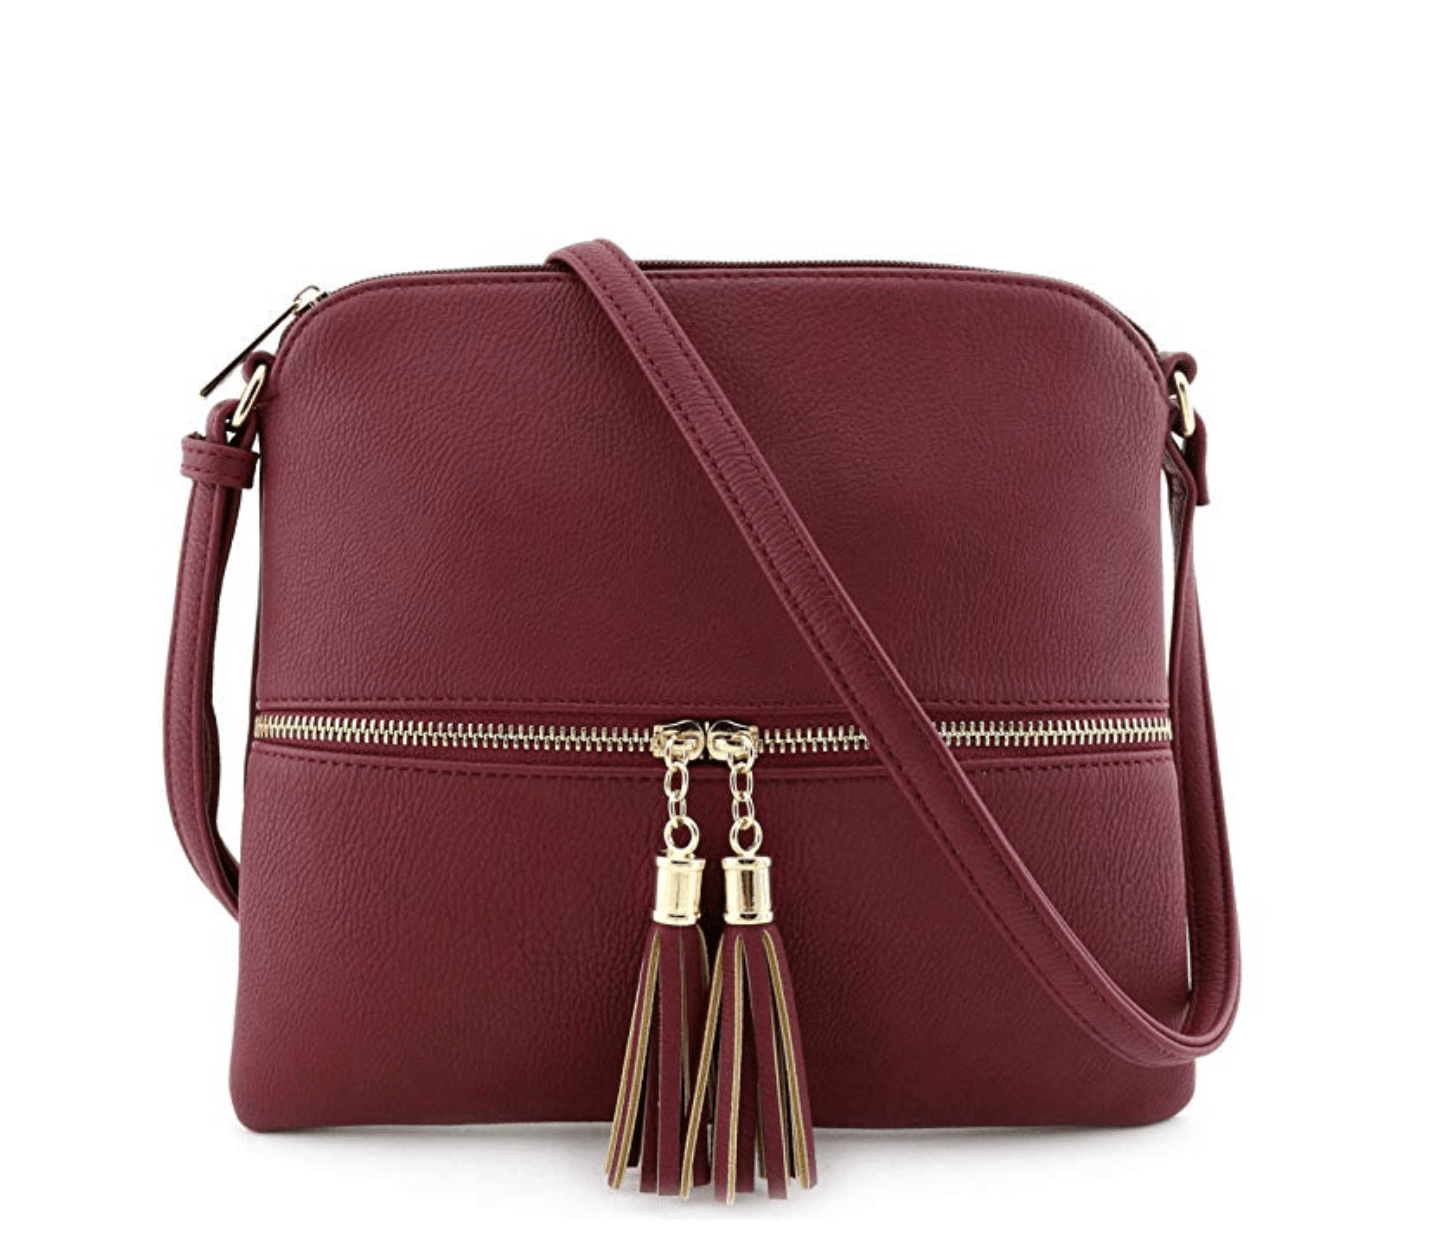 This affordable crossbody bag is a bestseller on